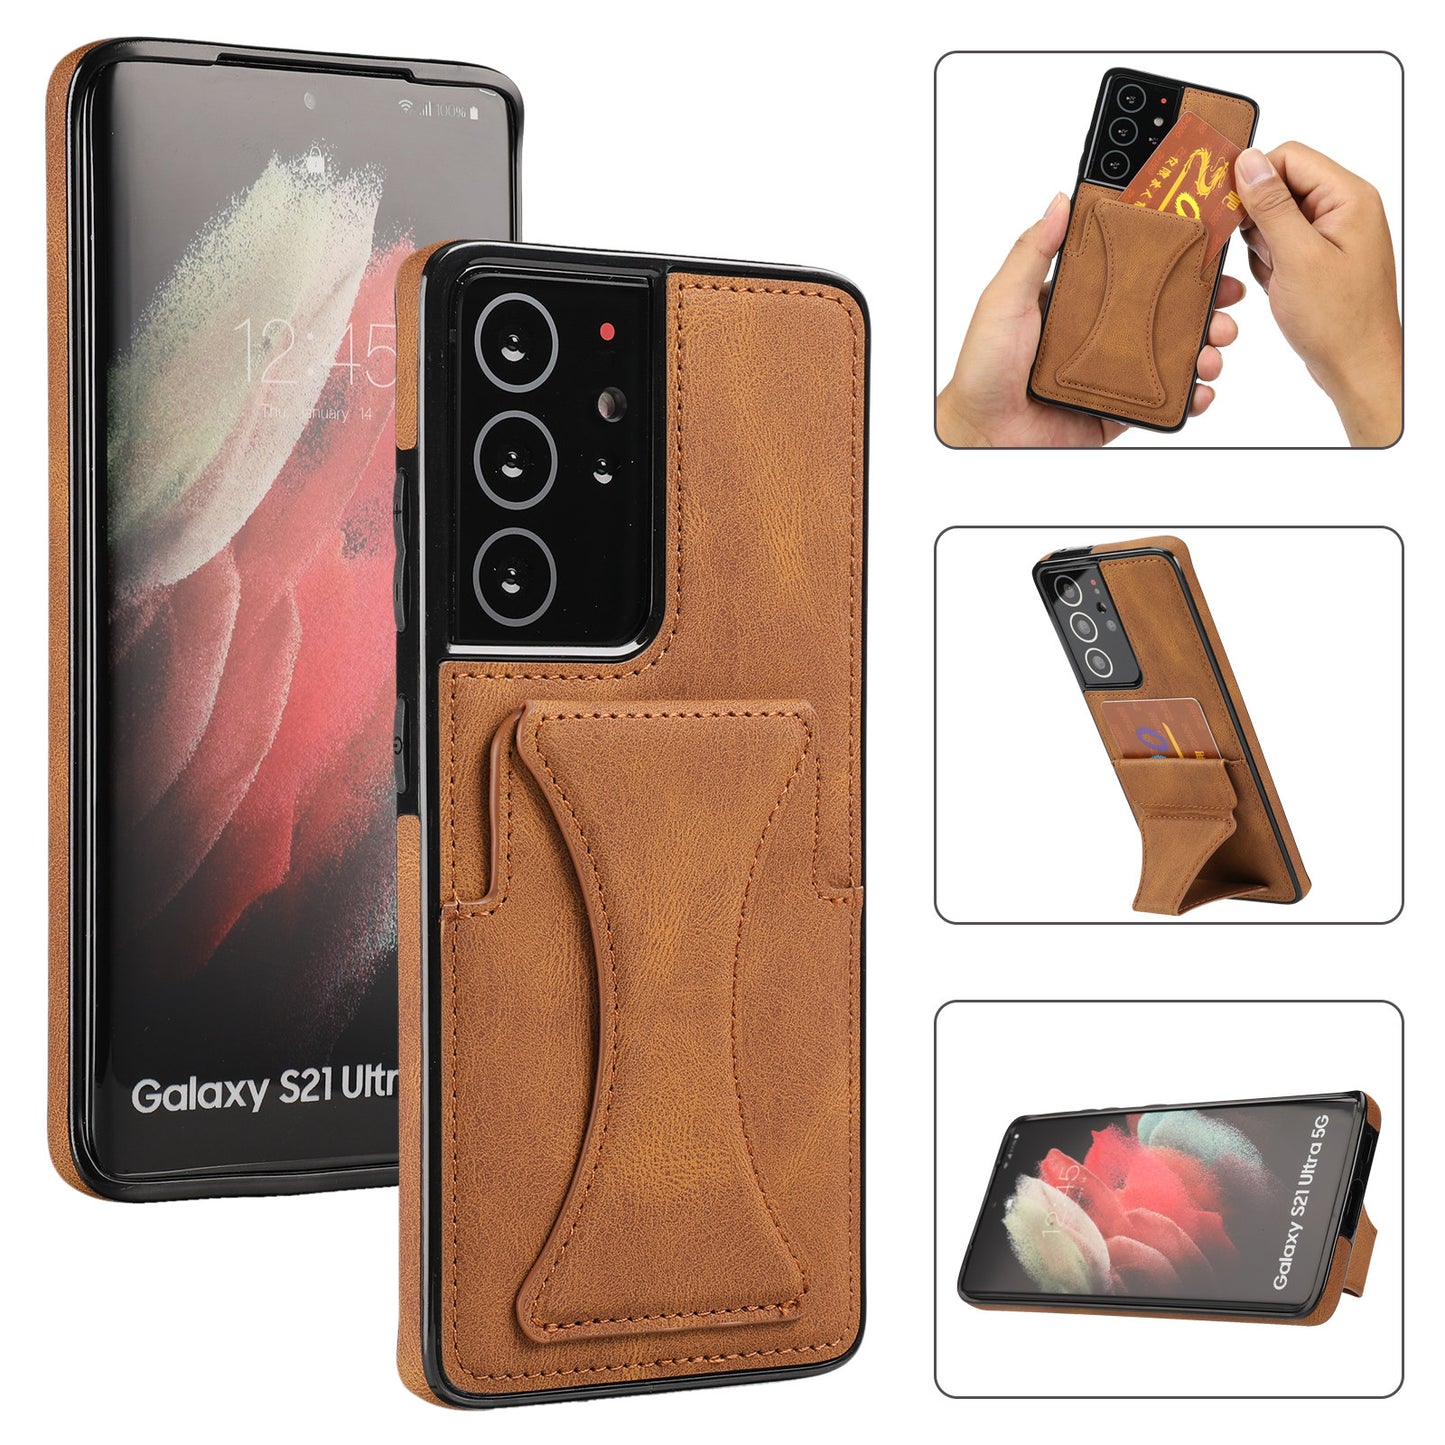 Galaxy Leather Card Slots Kickstand Cover